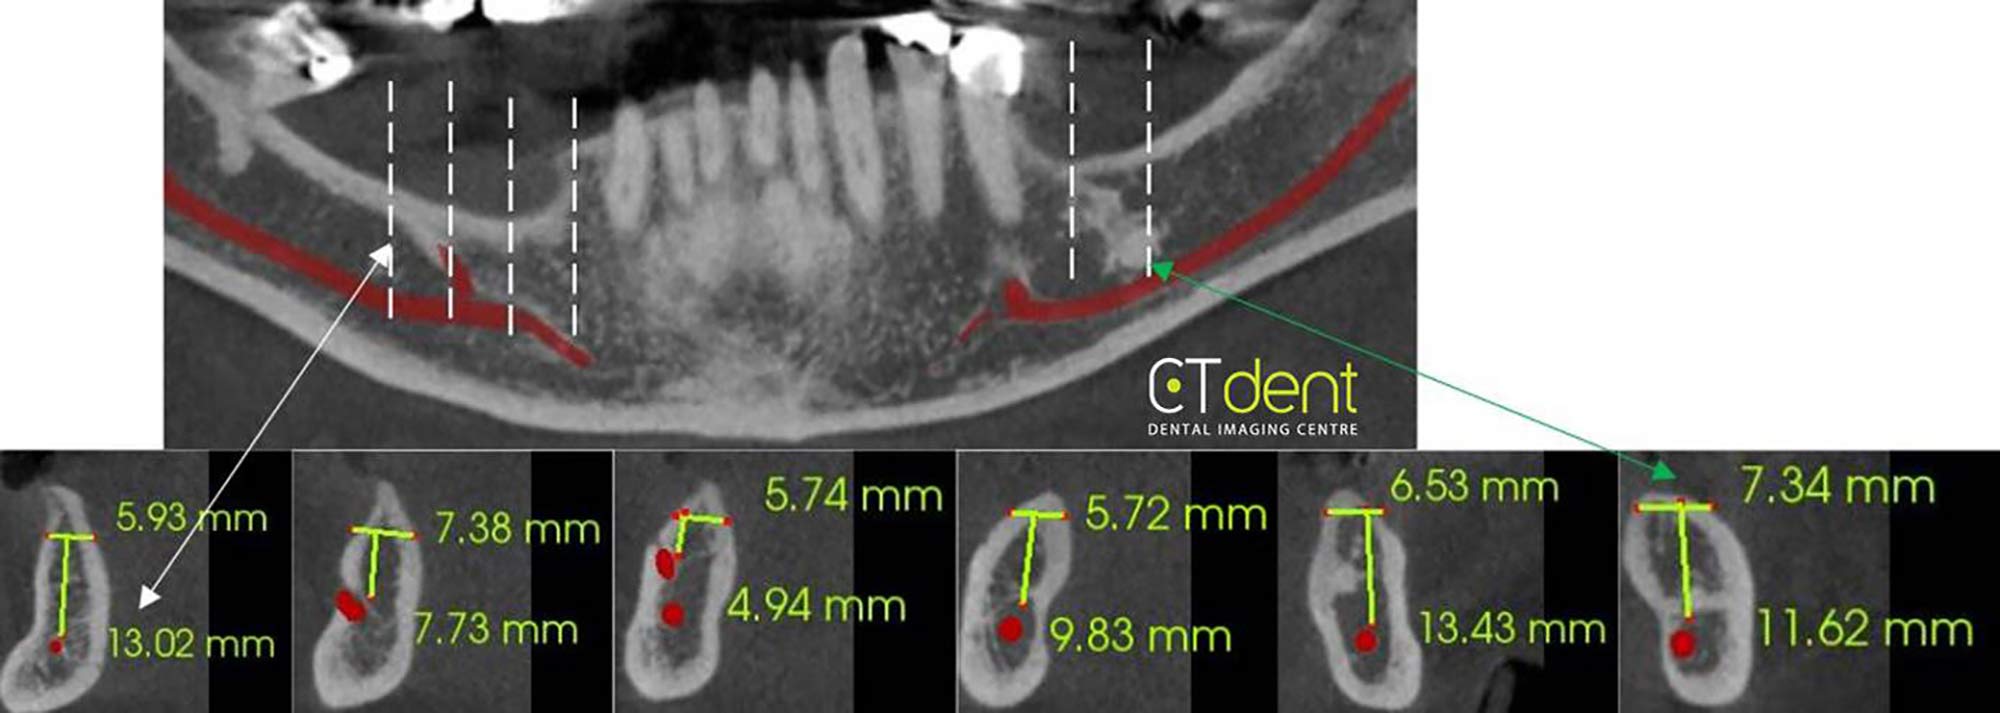 CT Dent scan showing cross-sections through selected areas of the mandible